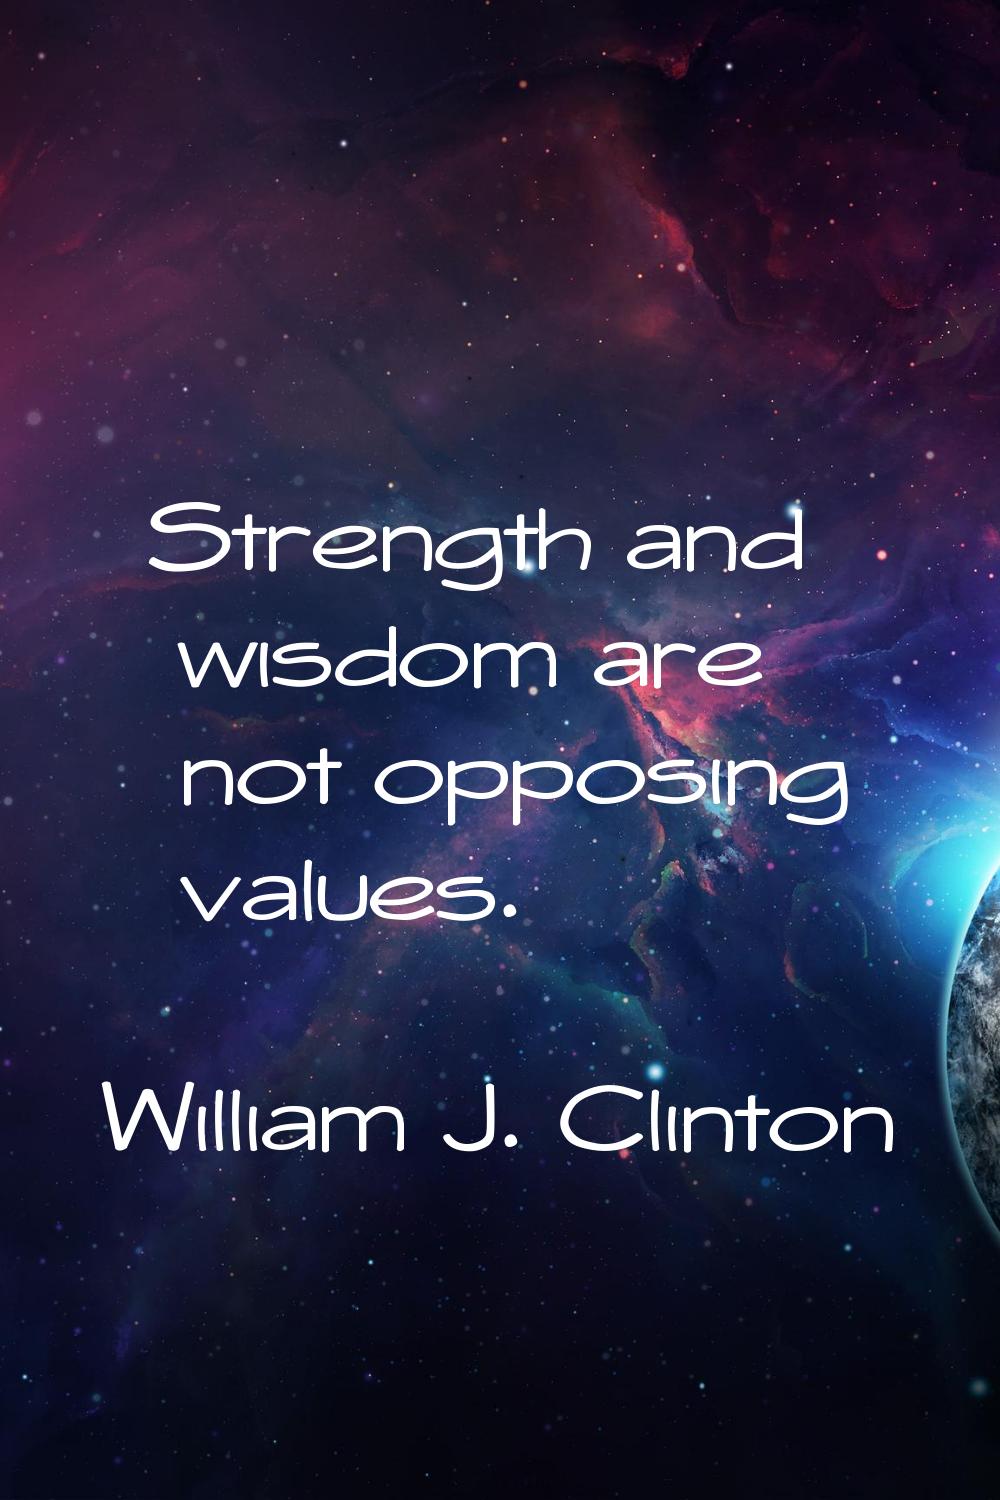 Strength and wisdom are not opposing values.